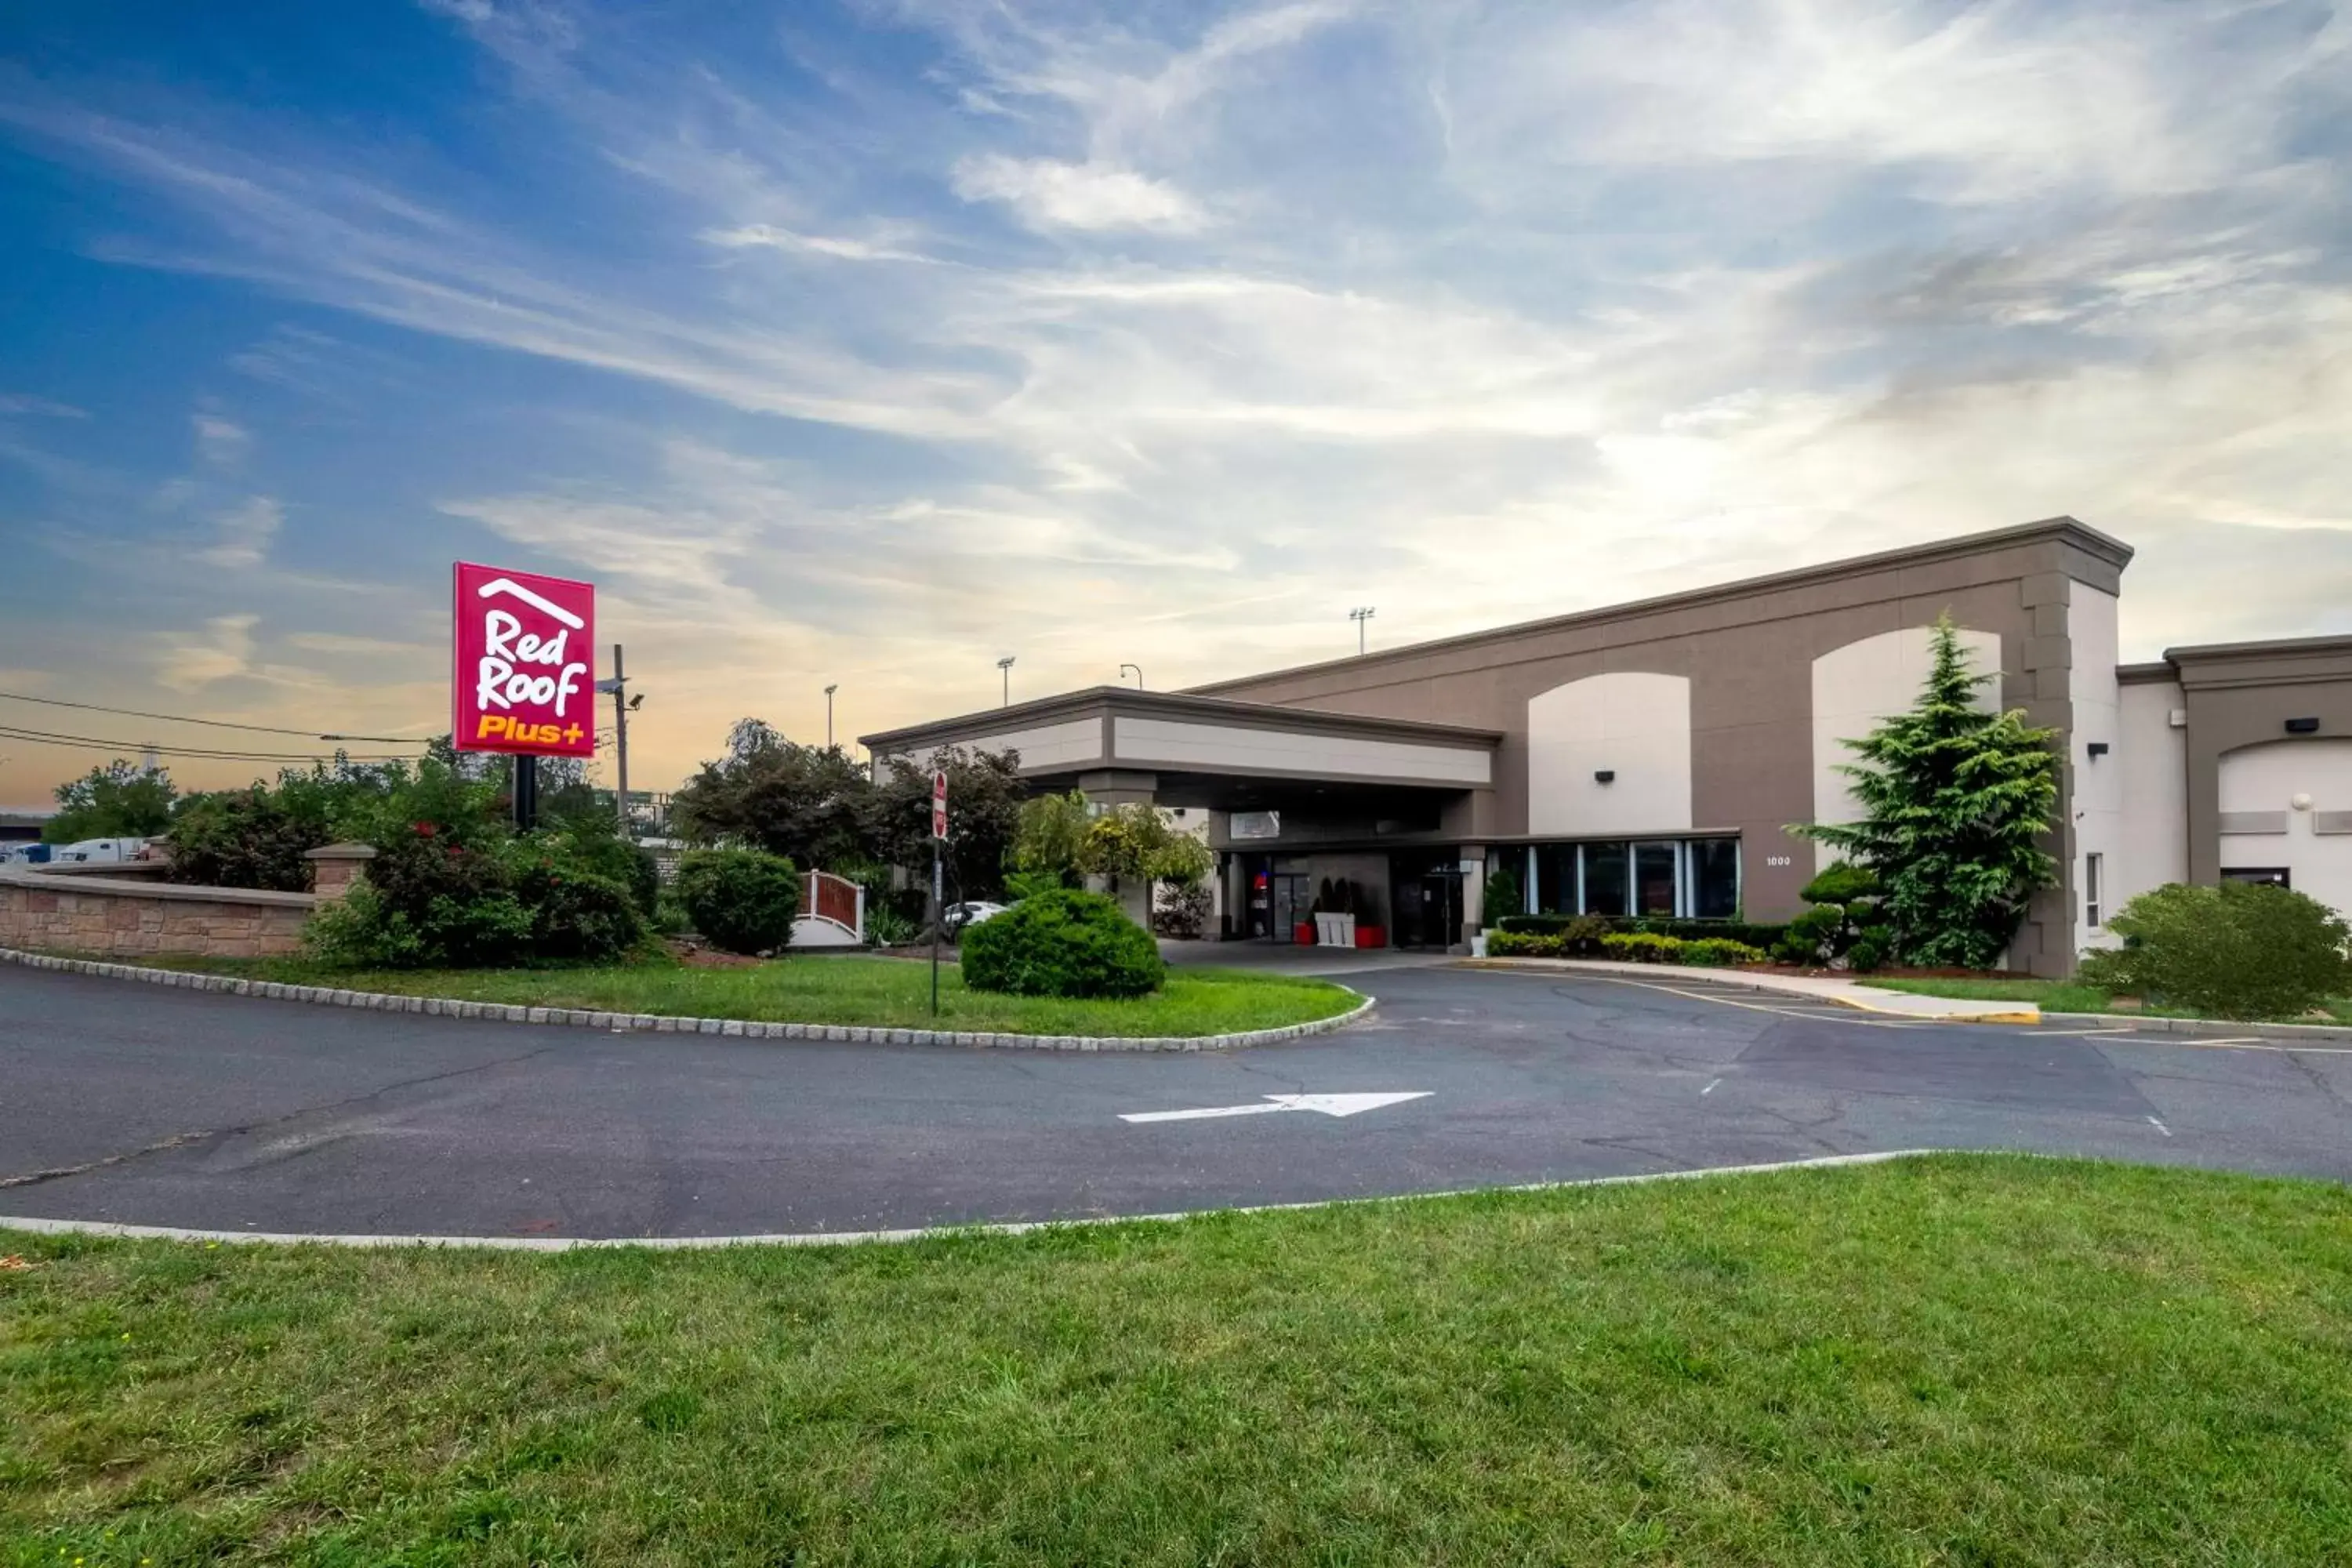 Property Building in Red Roof Inn PLUS Newark Liberty Airport - Carteret